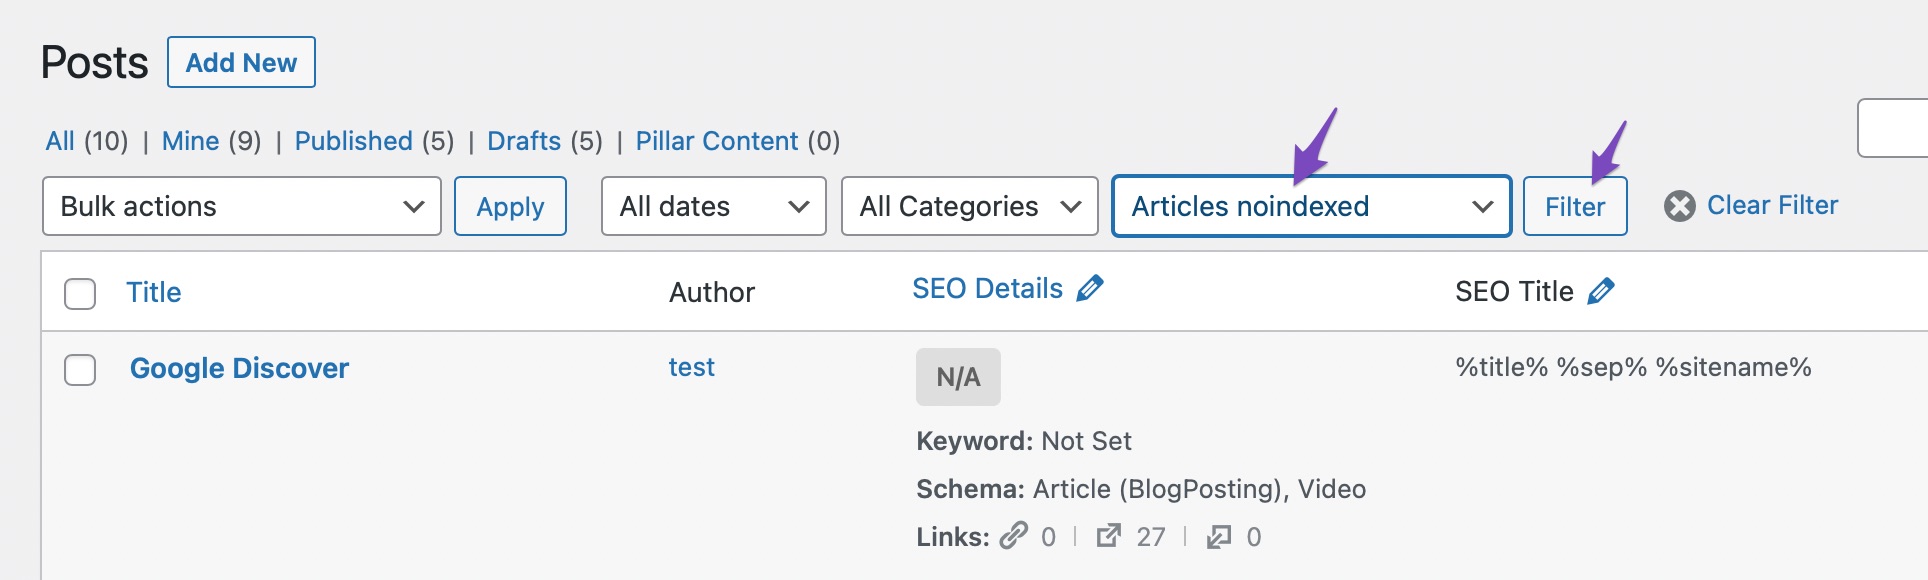 Filter by noindexed articles